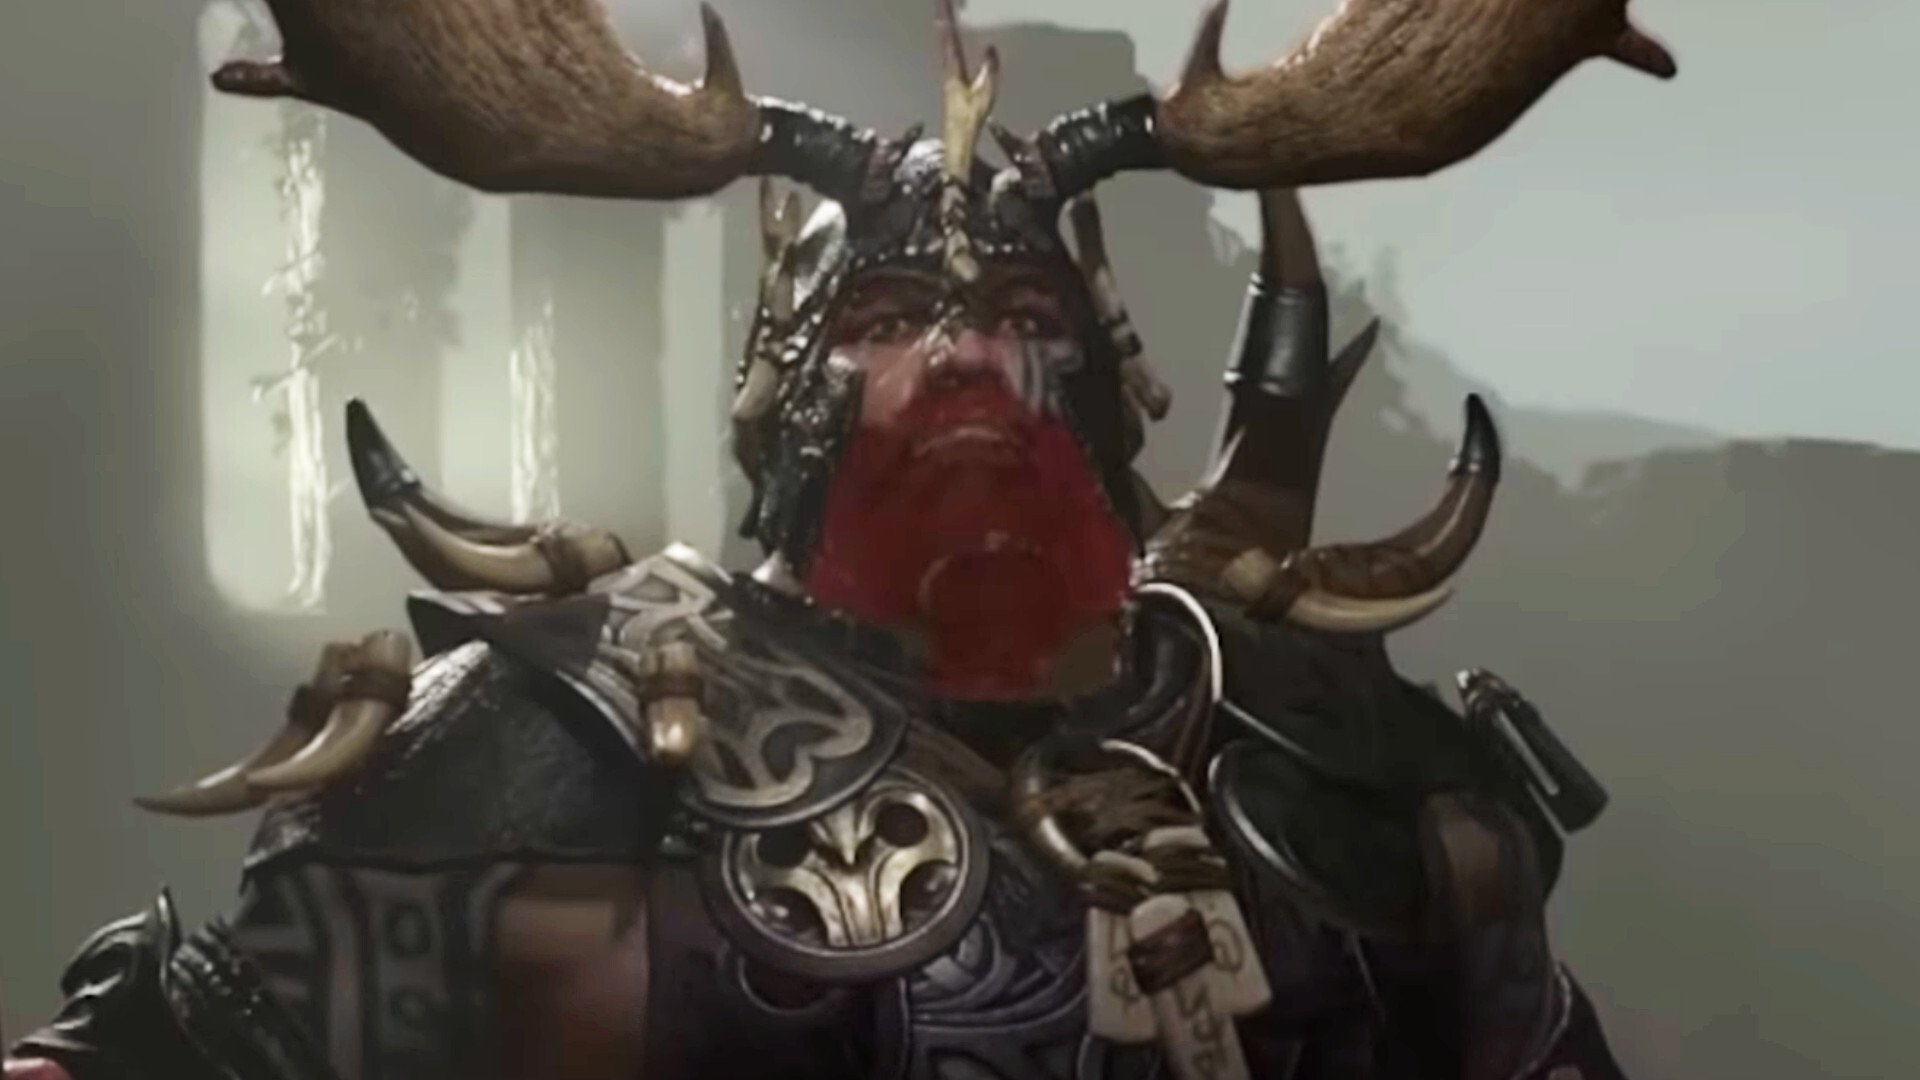 A red-bearded Diablo 4 druid wearing large horns on his helm stares toward the camera